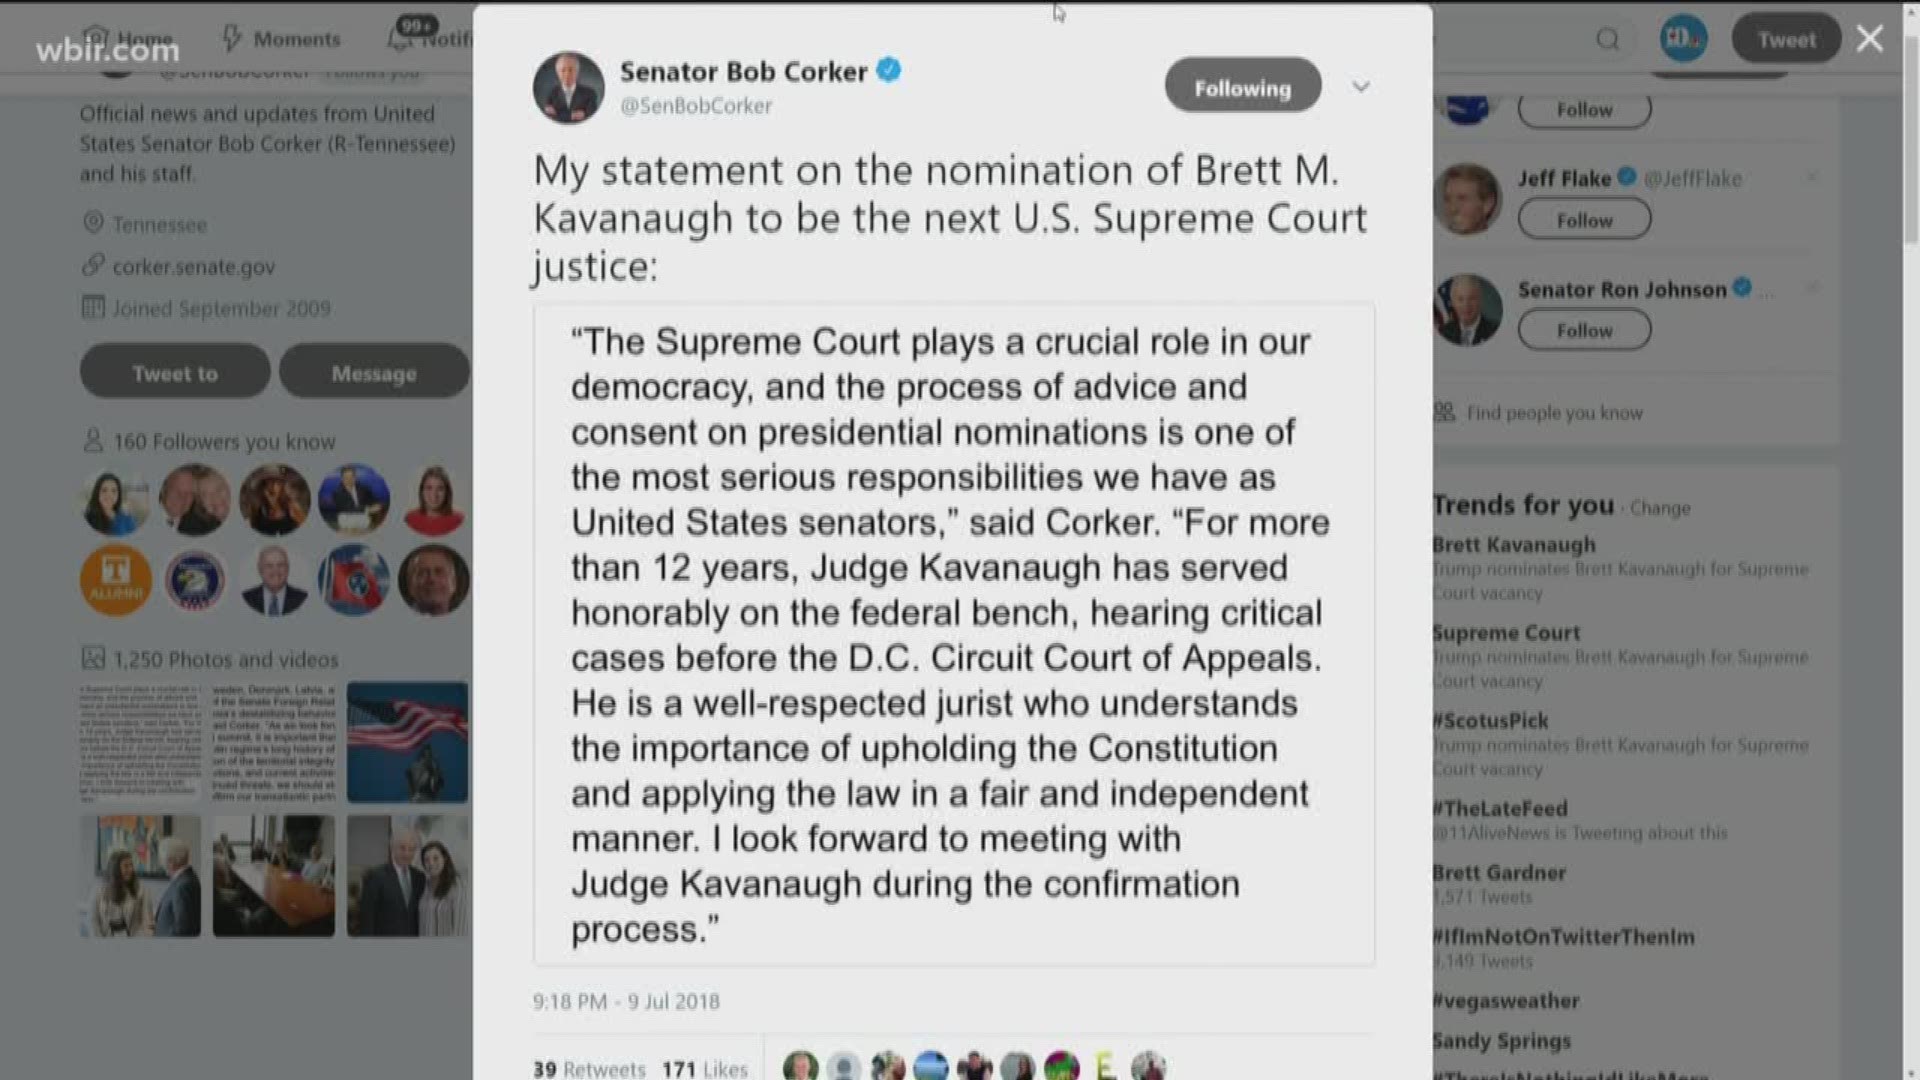 Senator Lamar Alexander says the president nominated a well-qualified jurist. Senator Bob Corker says Kavanaugh understands the importance of upholding the Constitution, and he looks forward to meeting with him.